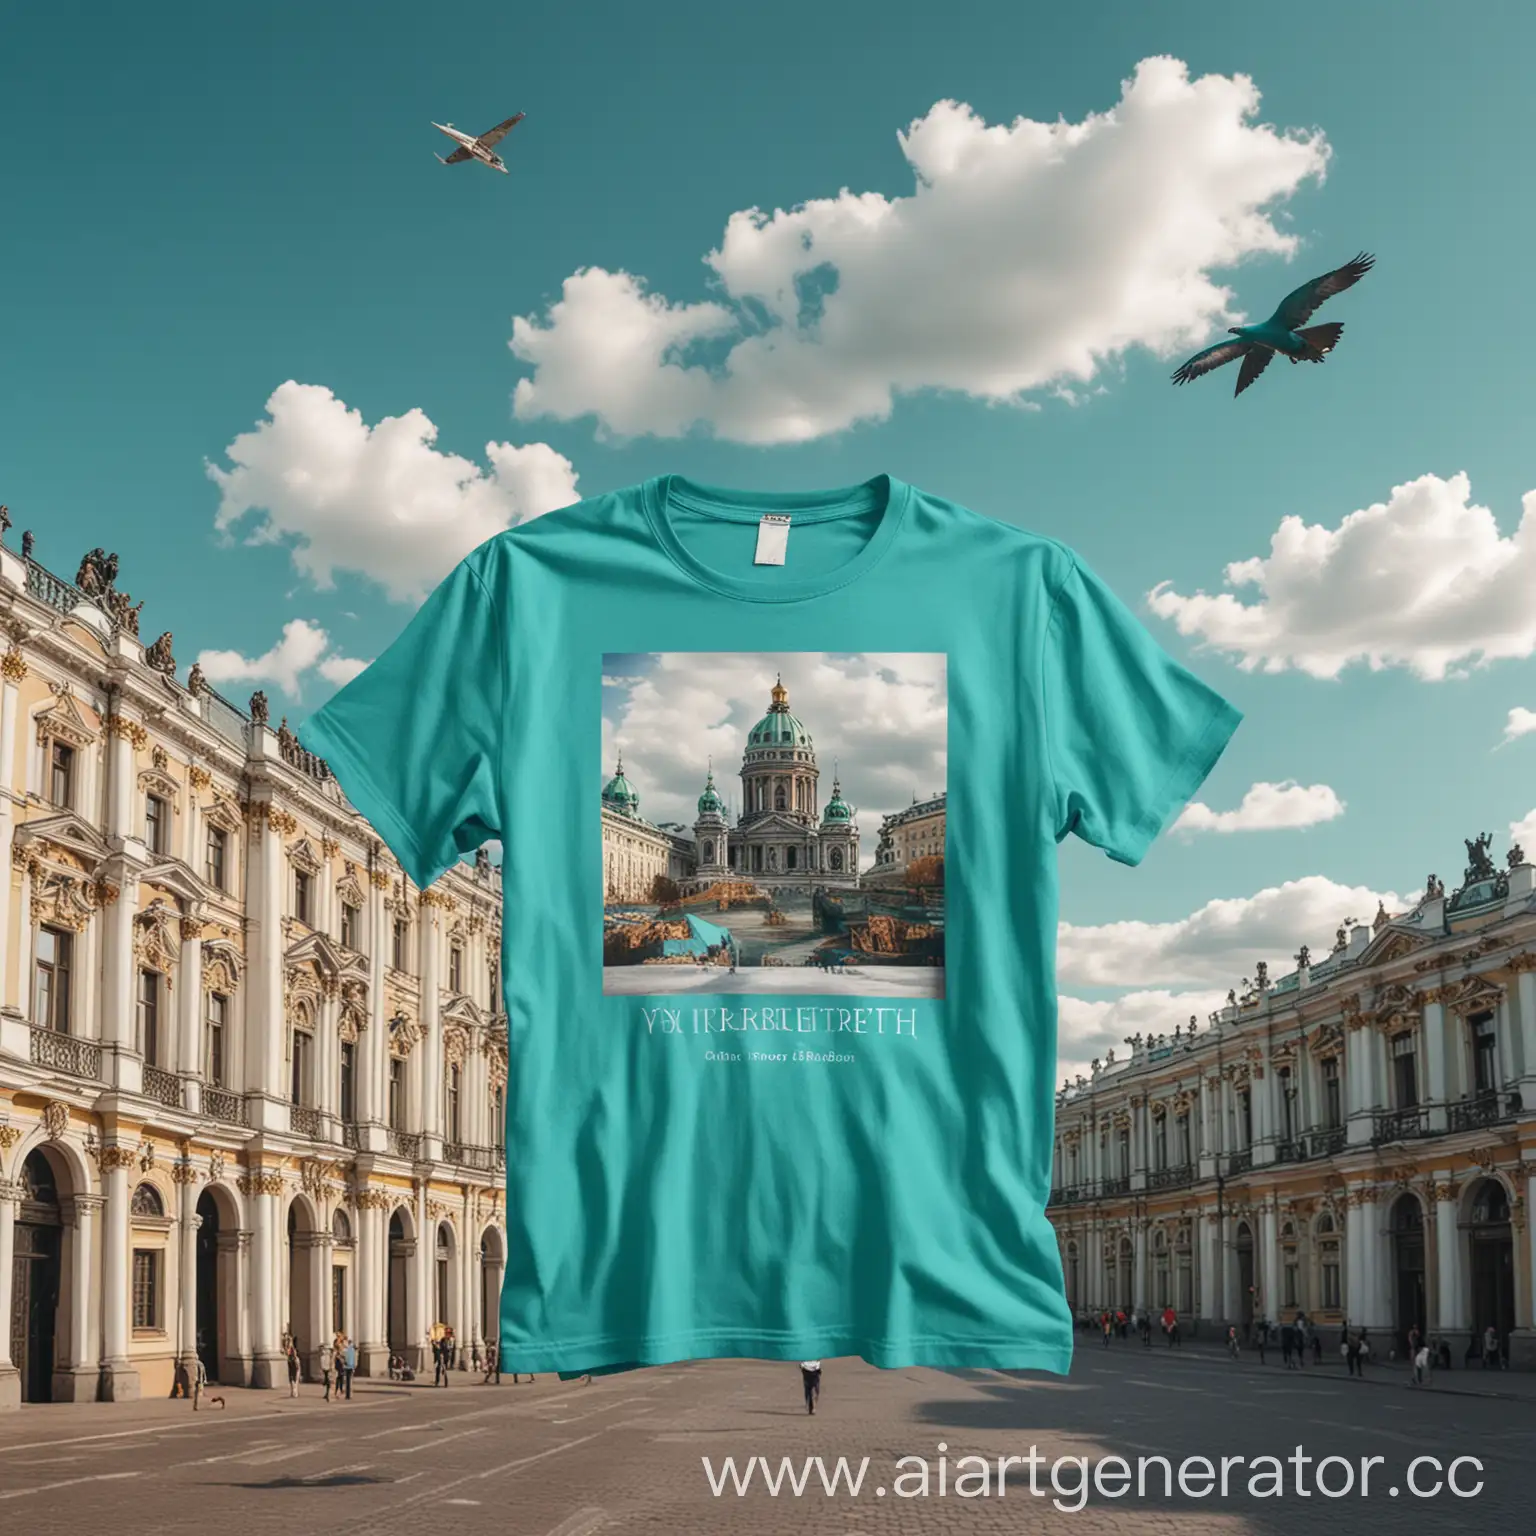 Giant-Turquoise-Vmerche-TShirt-at-Hermitage-with-Flying-Miniatures